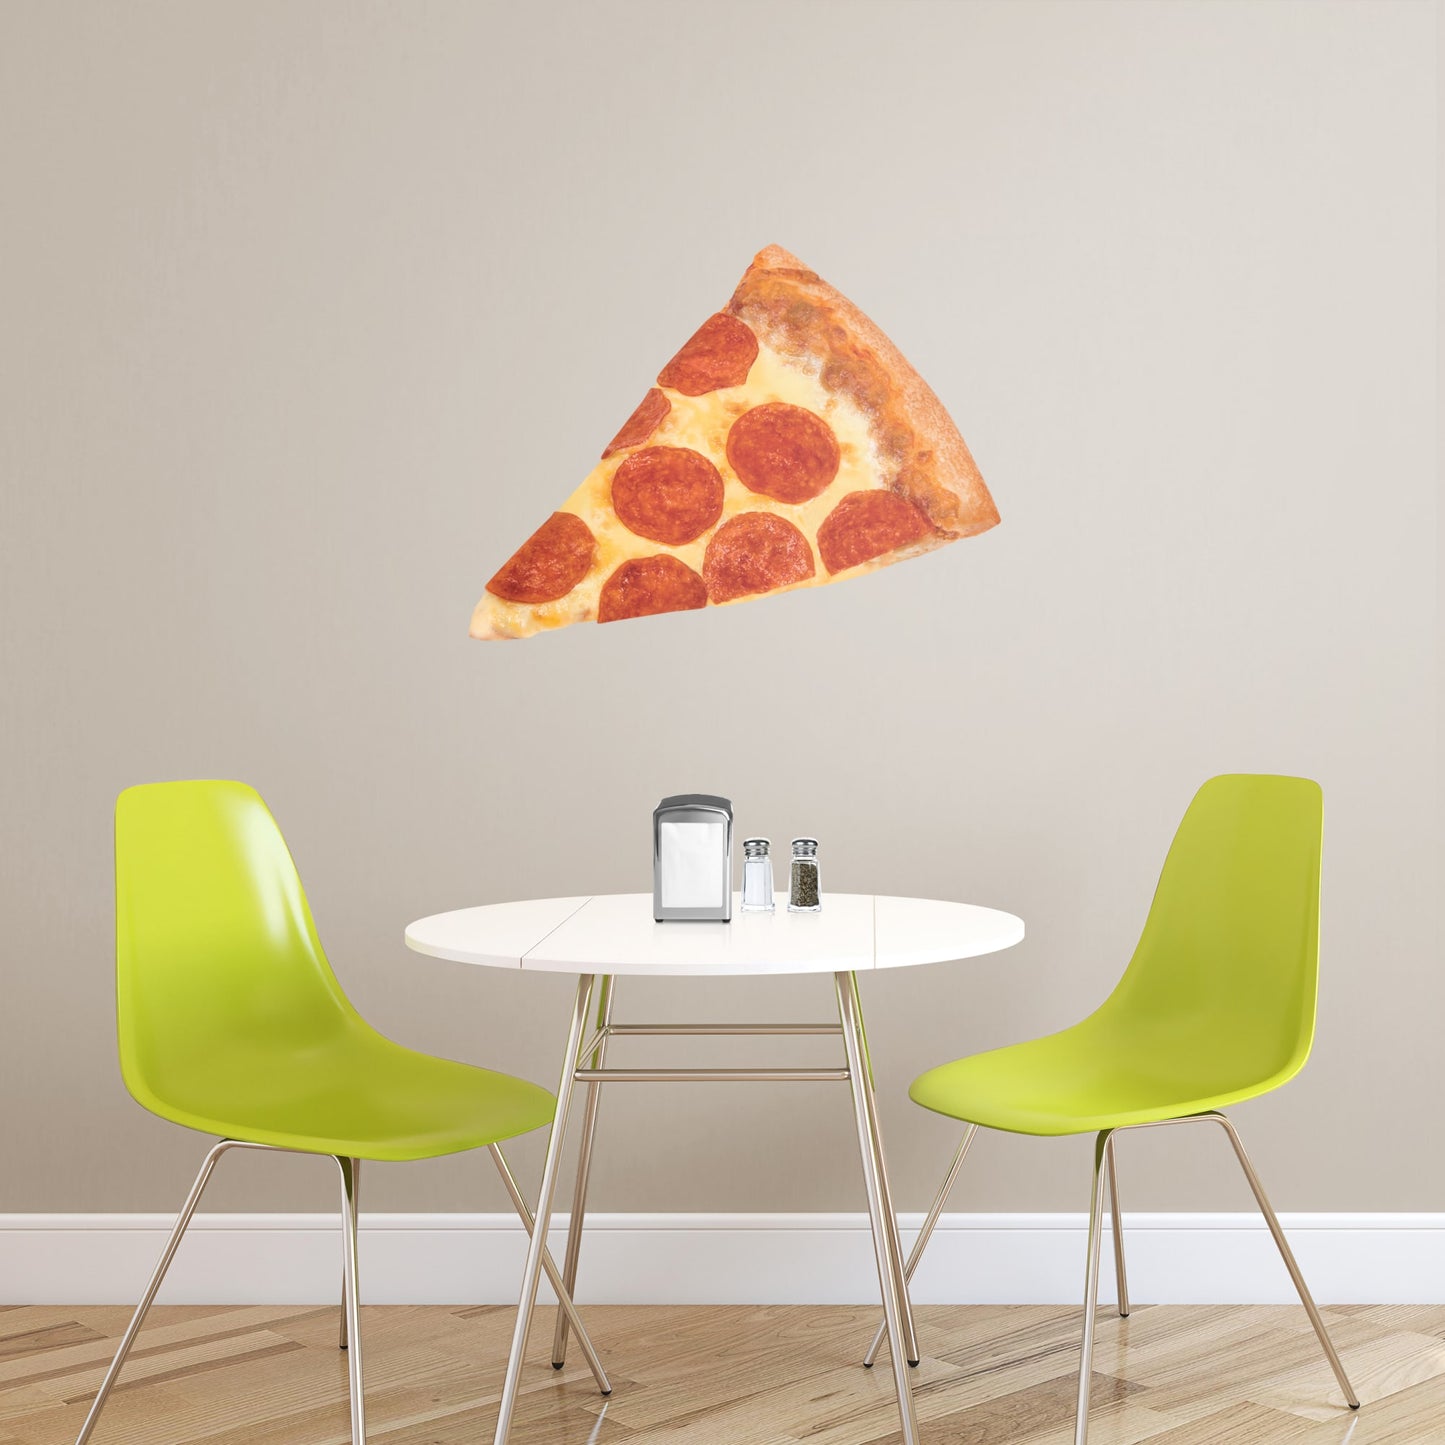 Giant Pizza + 2 Decals (47"W x 36"H)